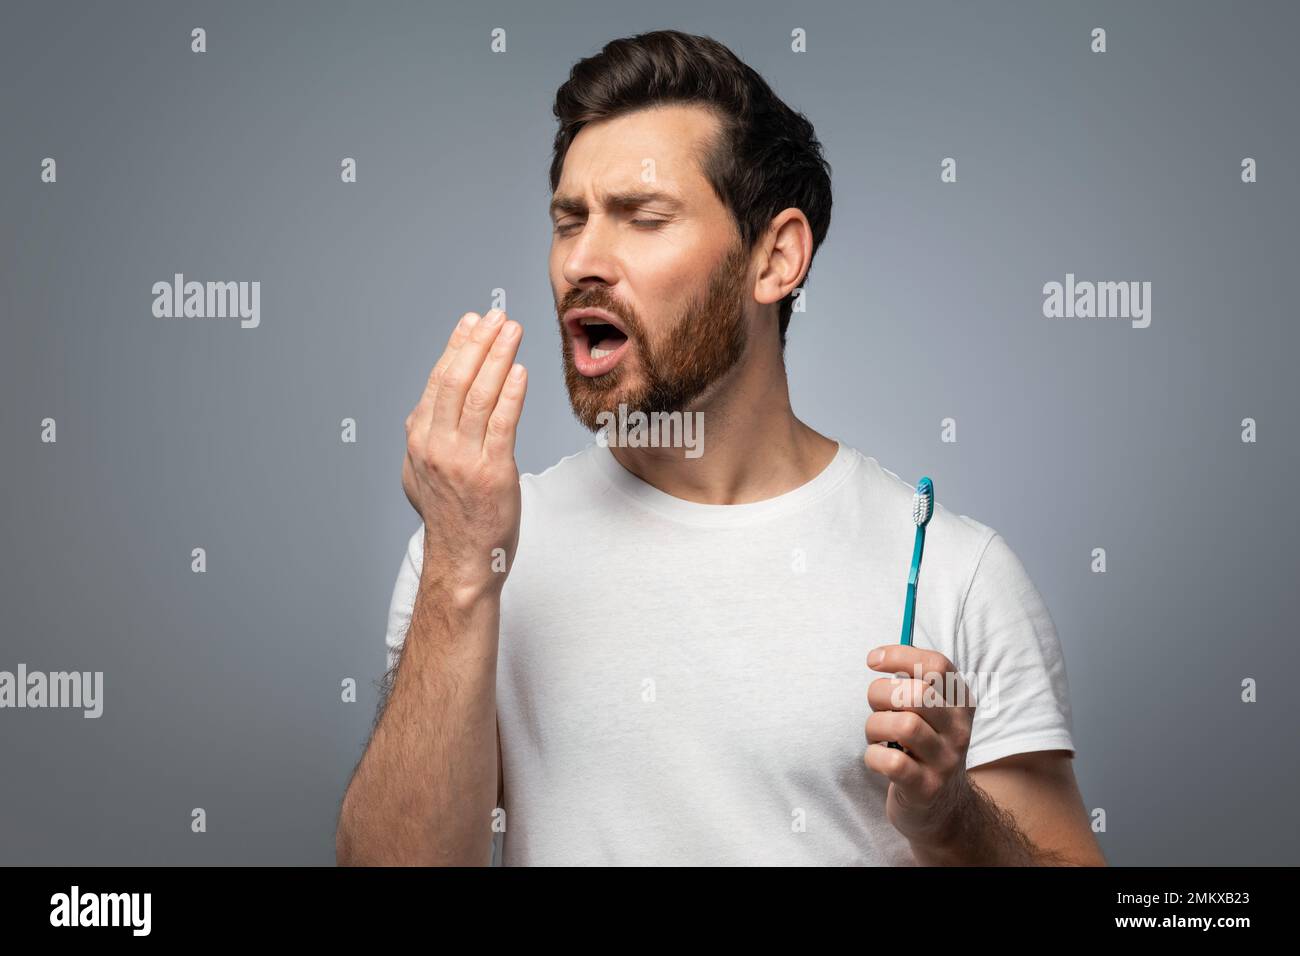 Bad breath. Handsome middle aged man checking his breath with his hand, blowing to it, standing over grey background Stock Photo